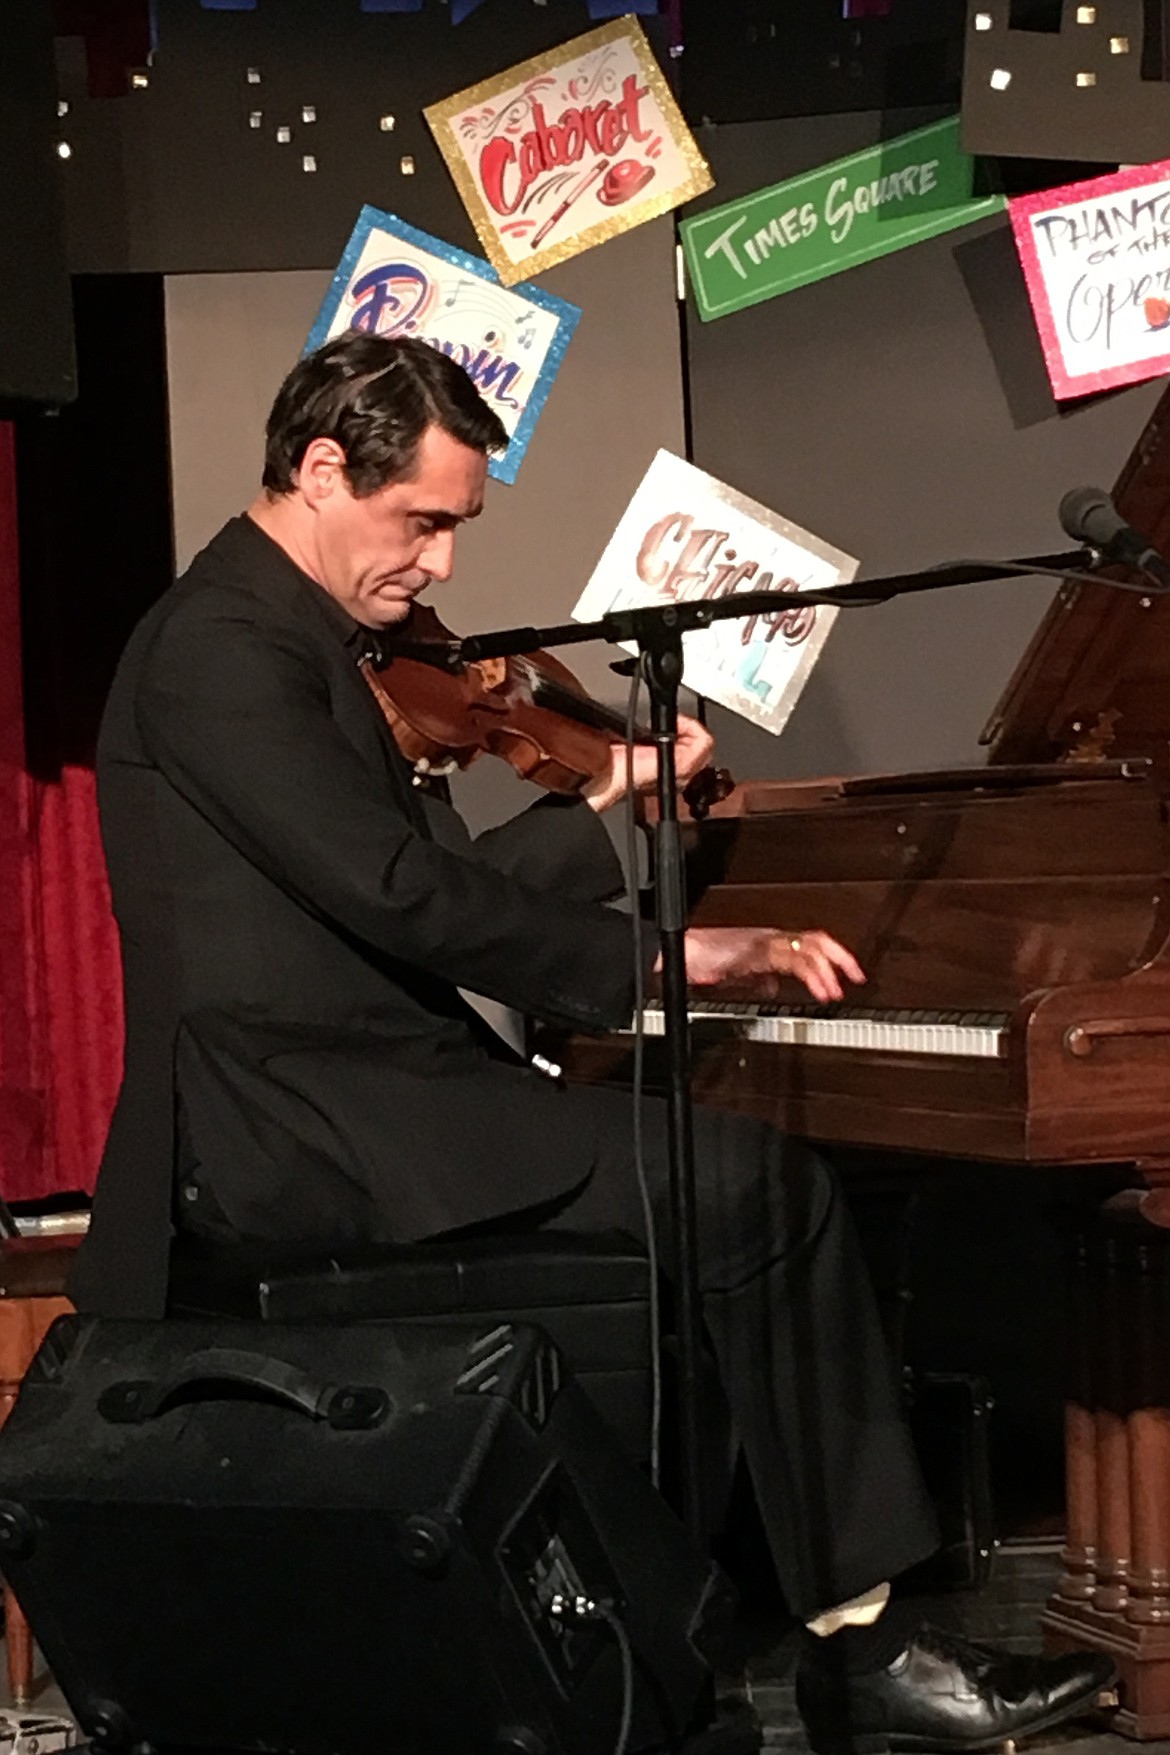 DAVID SHENTON delights the Paradise Center audience playing violin and piano at the same time during the O Sole Trio performance Saturday night, April 13.